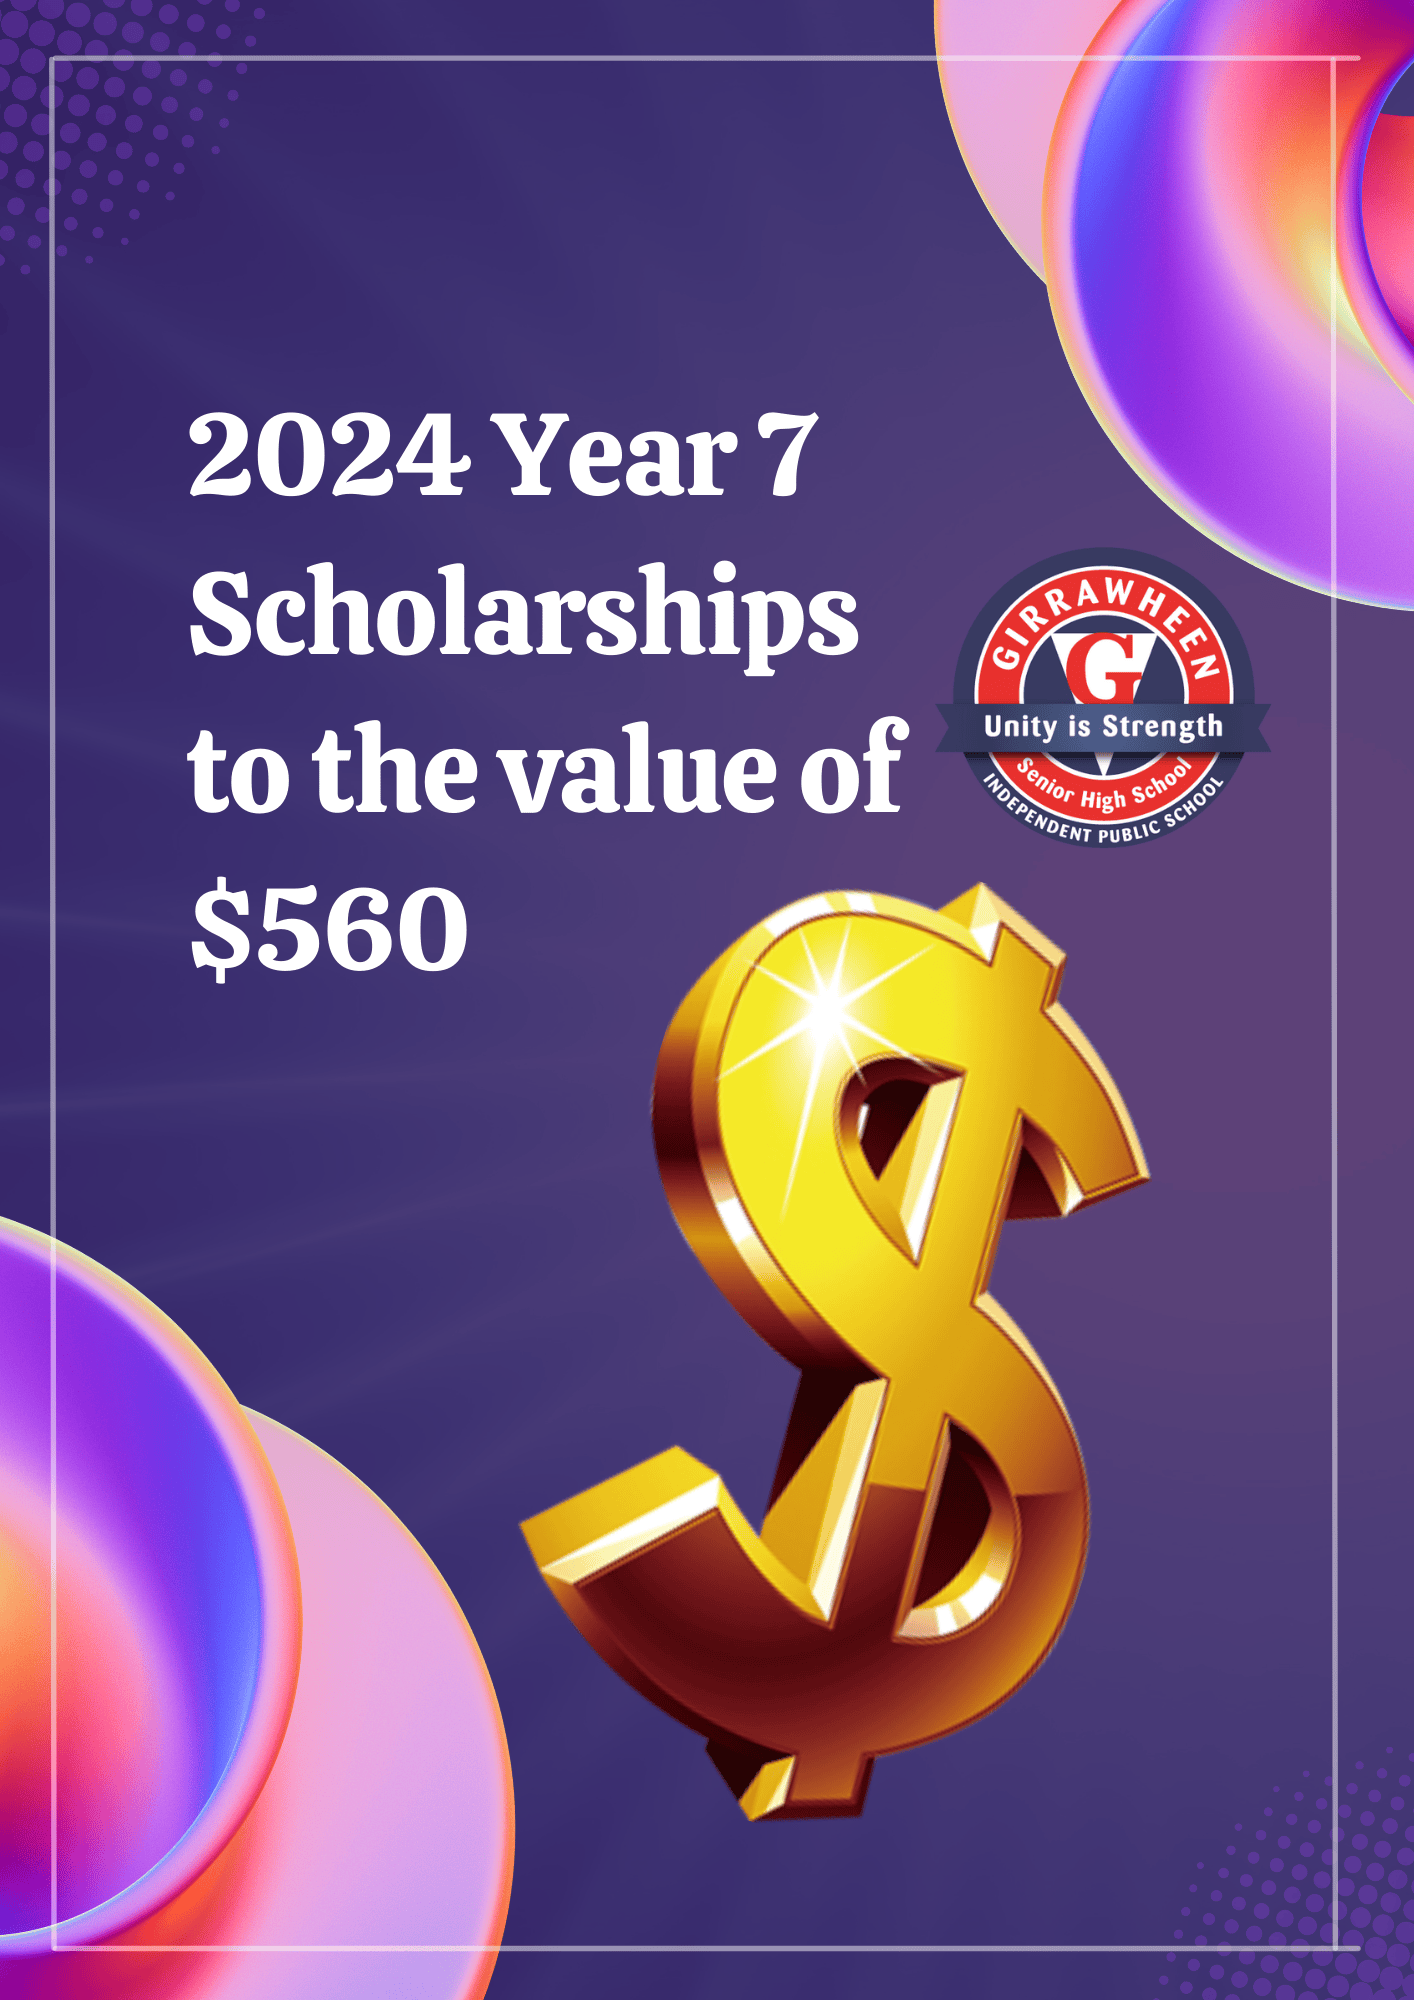 You are currently viewing 2024 Year 7 Scholarship Applications Open